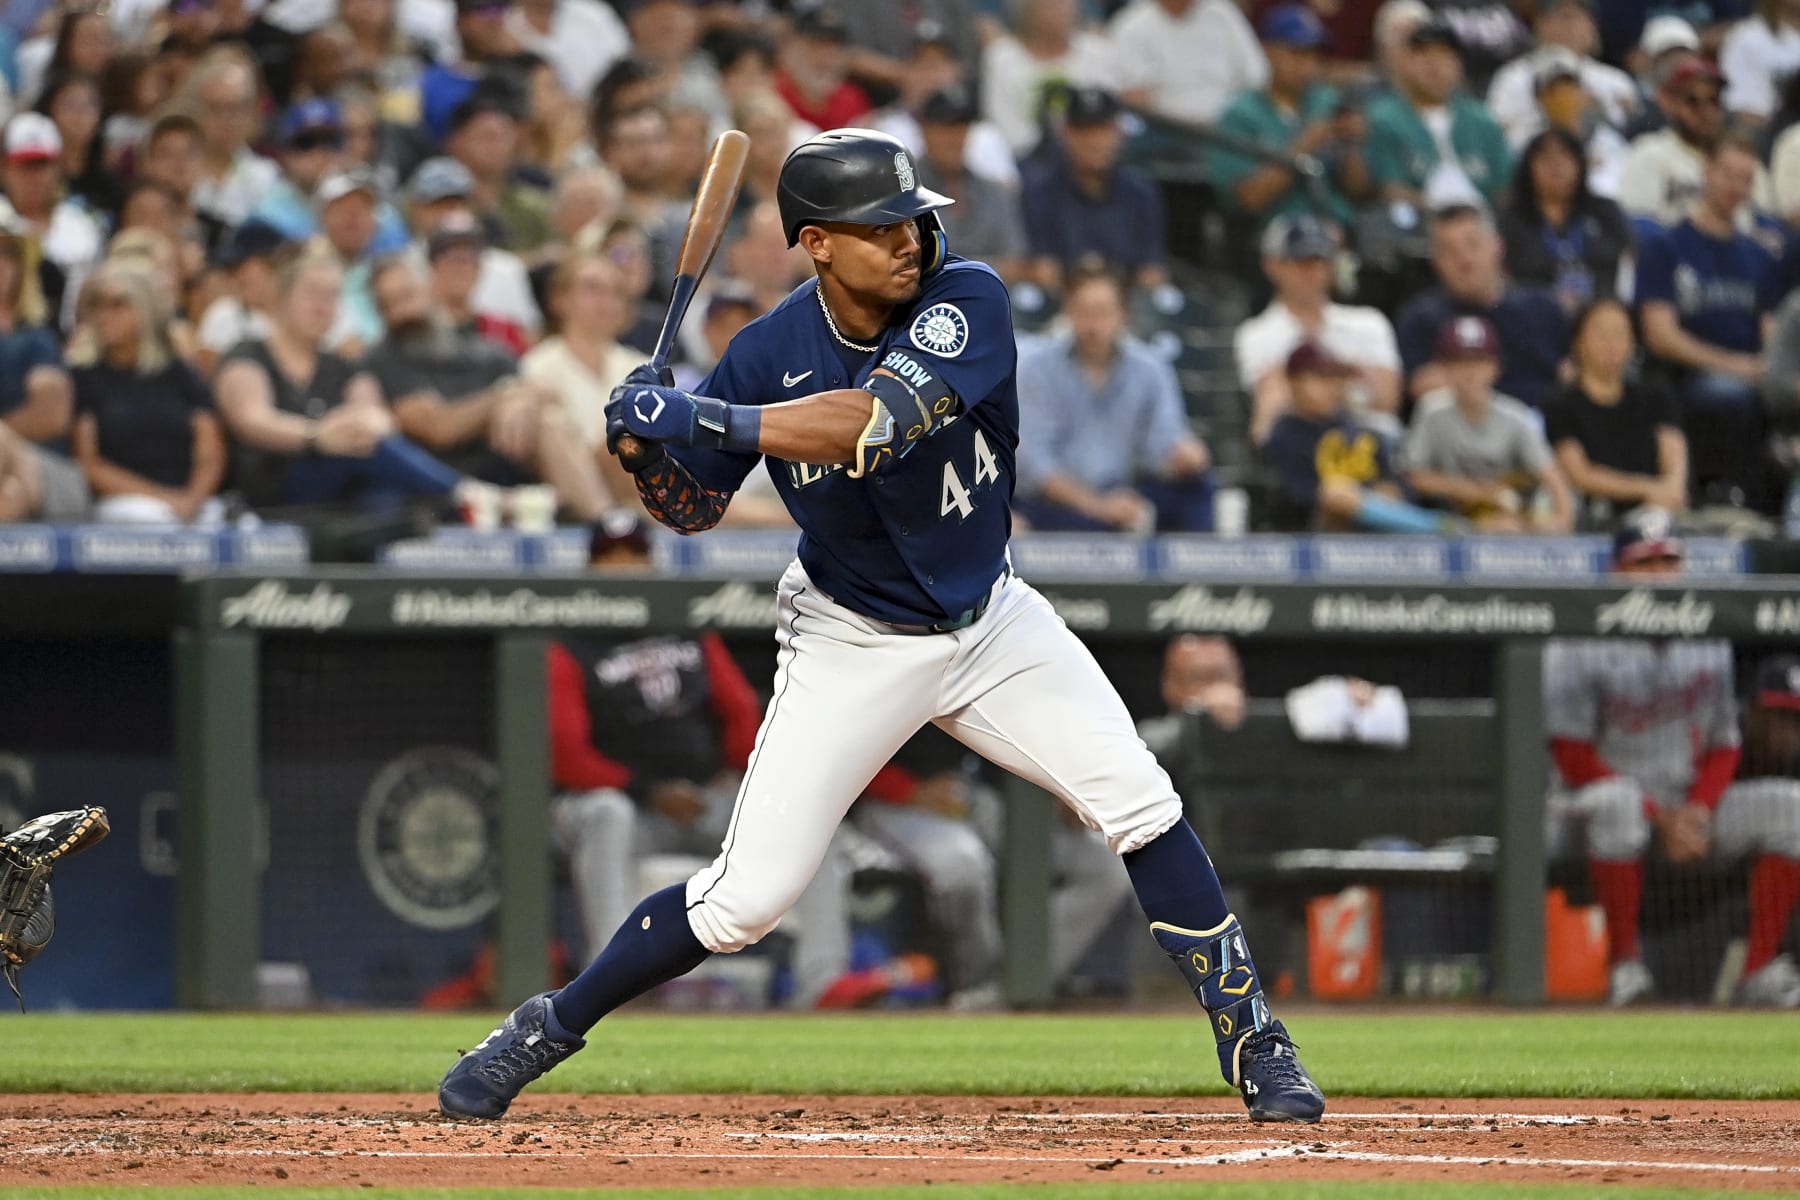 Report: Julio Rodríguez, Mariners Agree to $210M Contract; Could